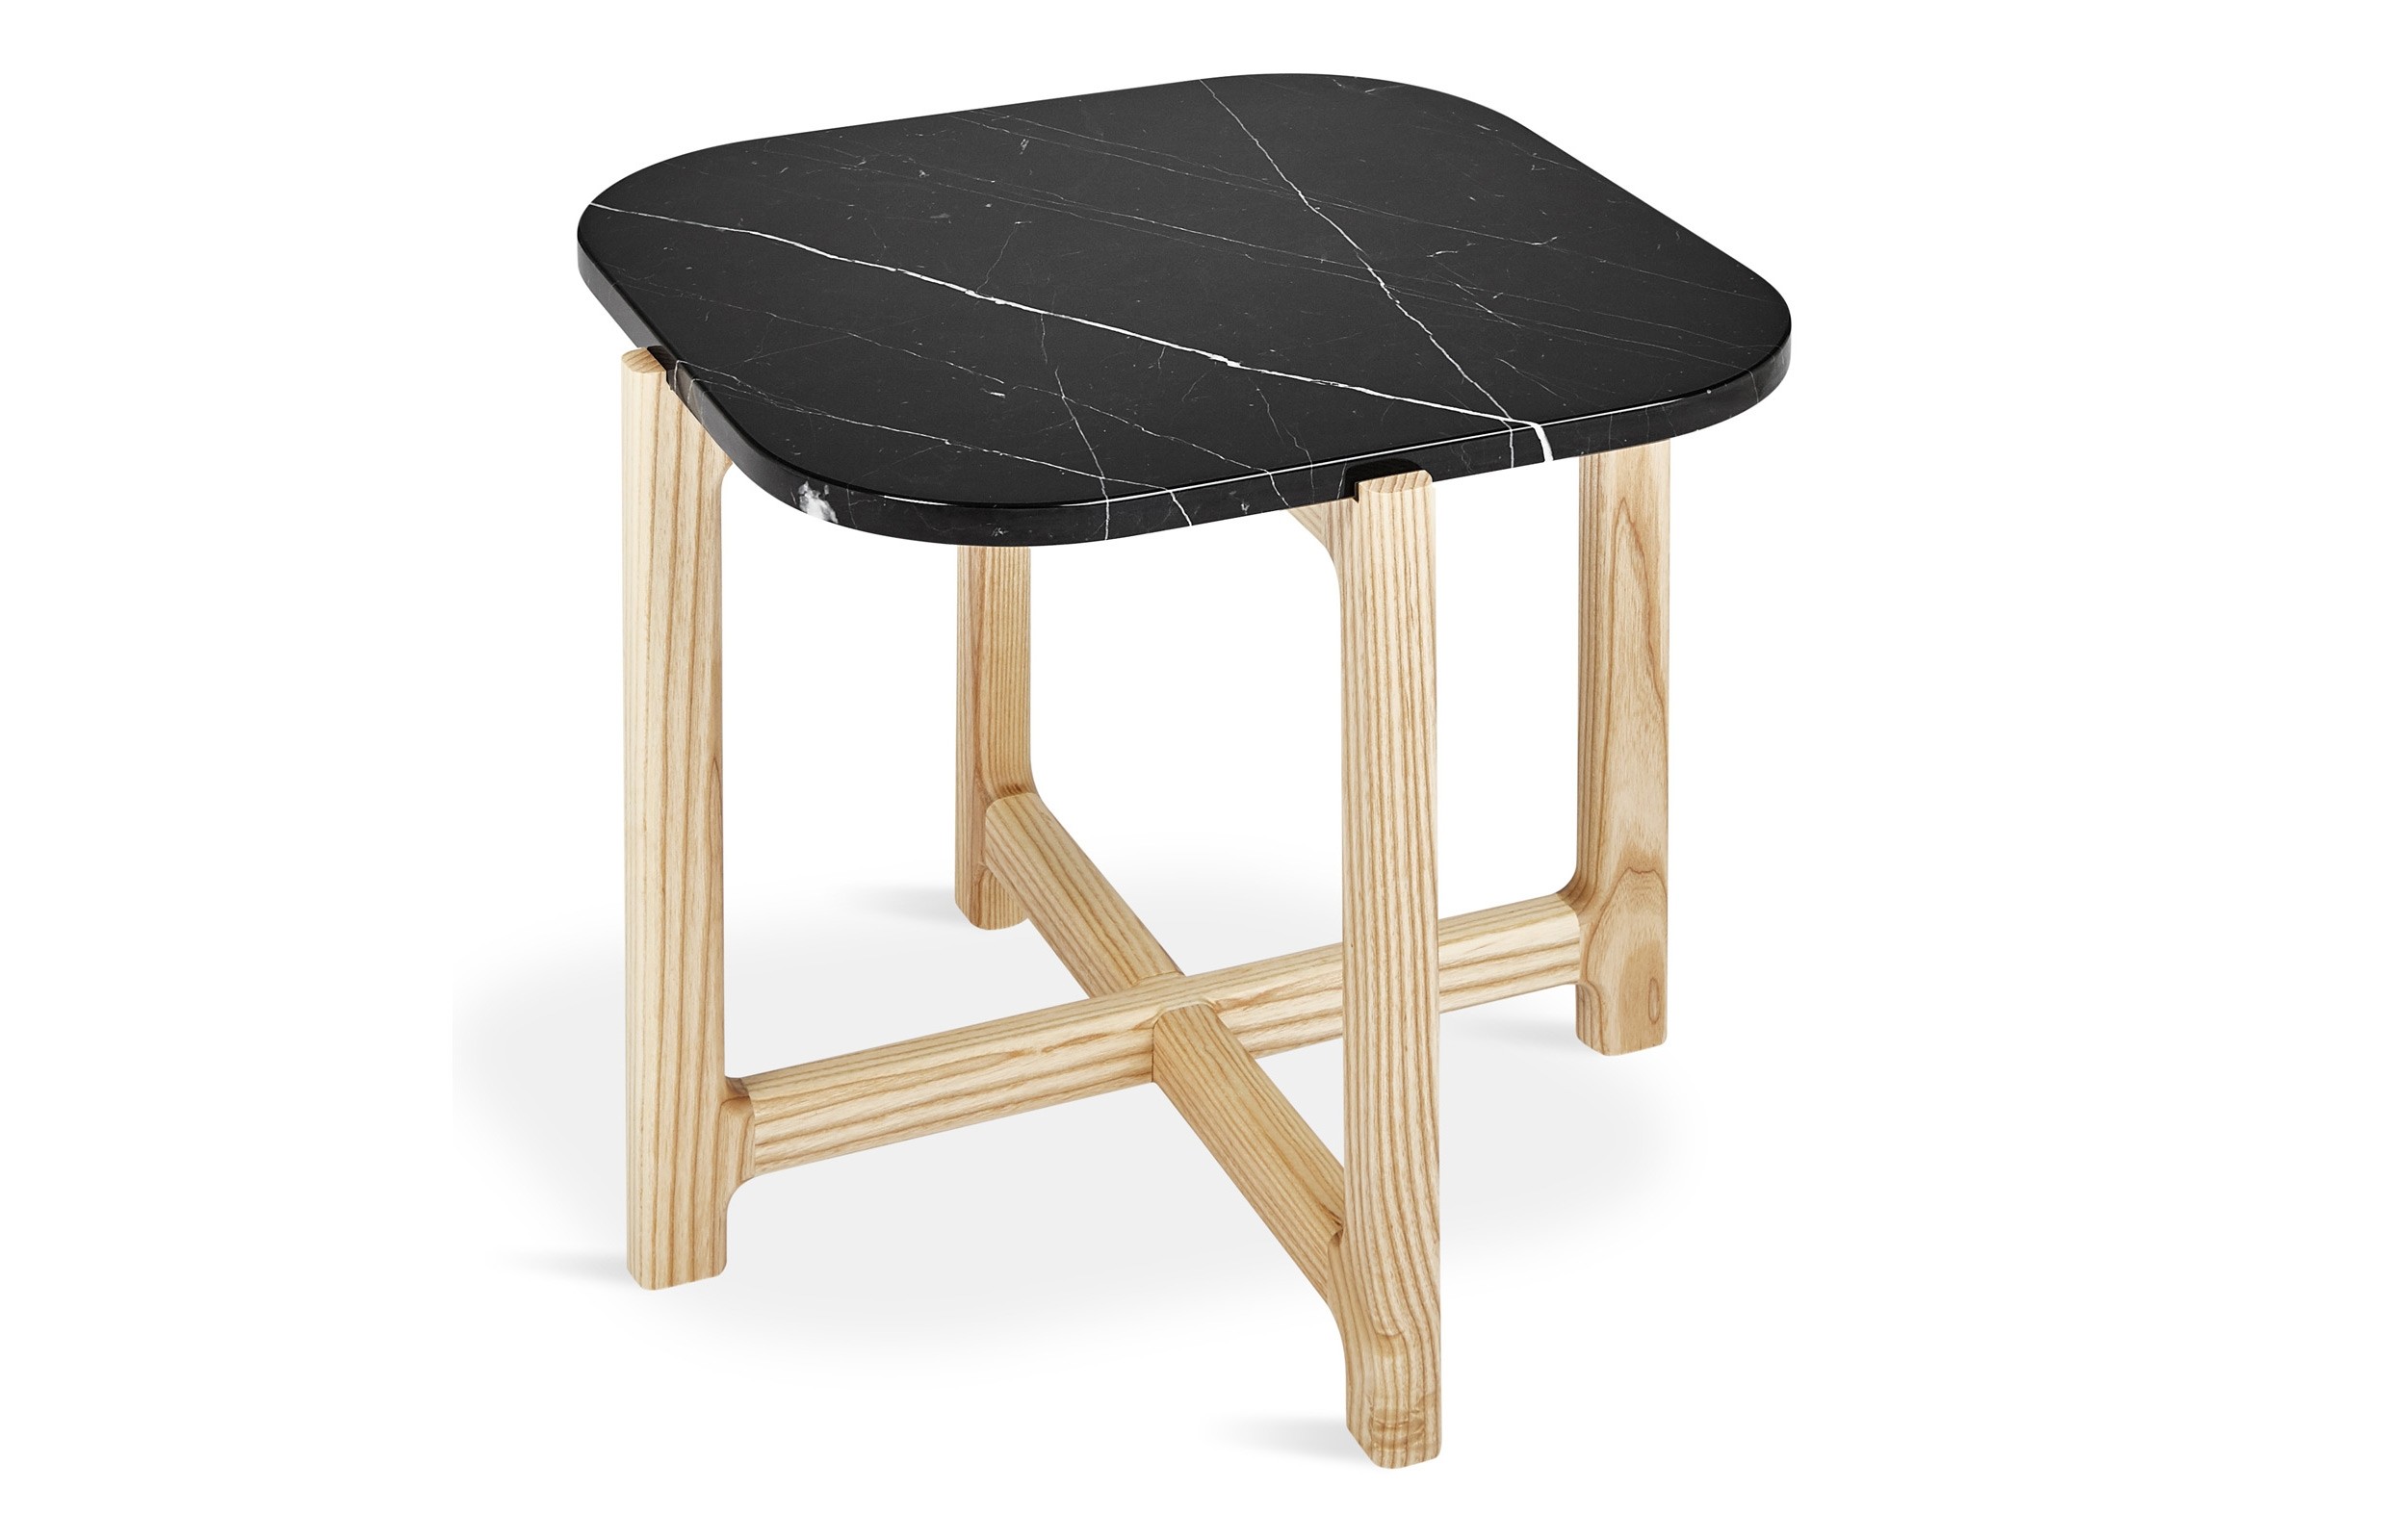 quarry end table viesso nero marble base accent vintage furniture sydney wood drum wall clock cute round tablecloths bunnings outdoor lounge settings front door threshold fine